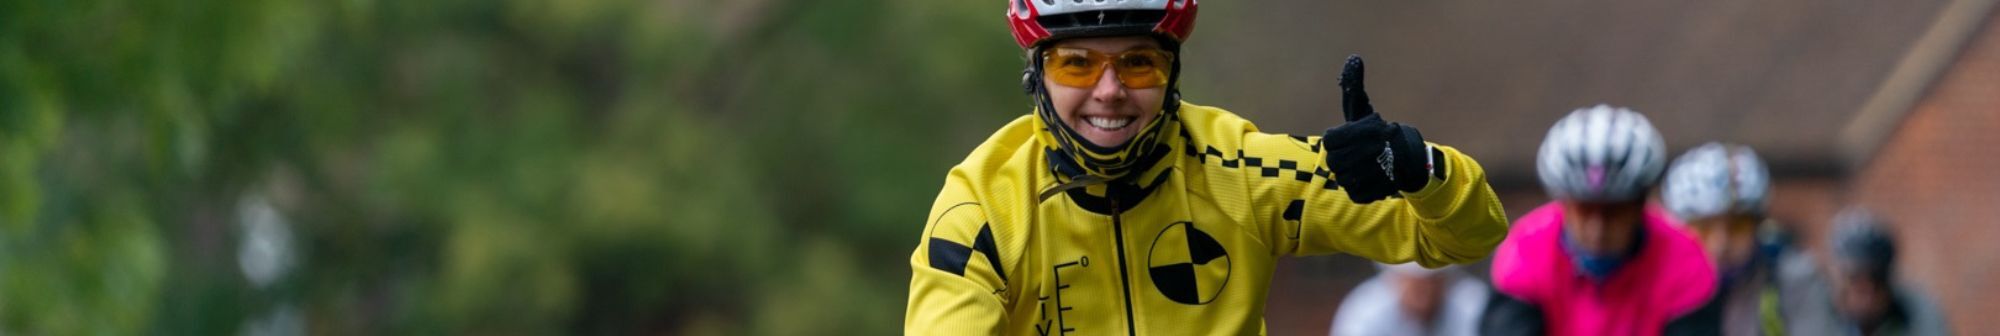 woman-on-bike-with-thumbs-up